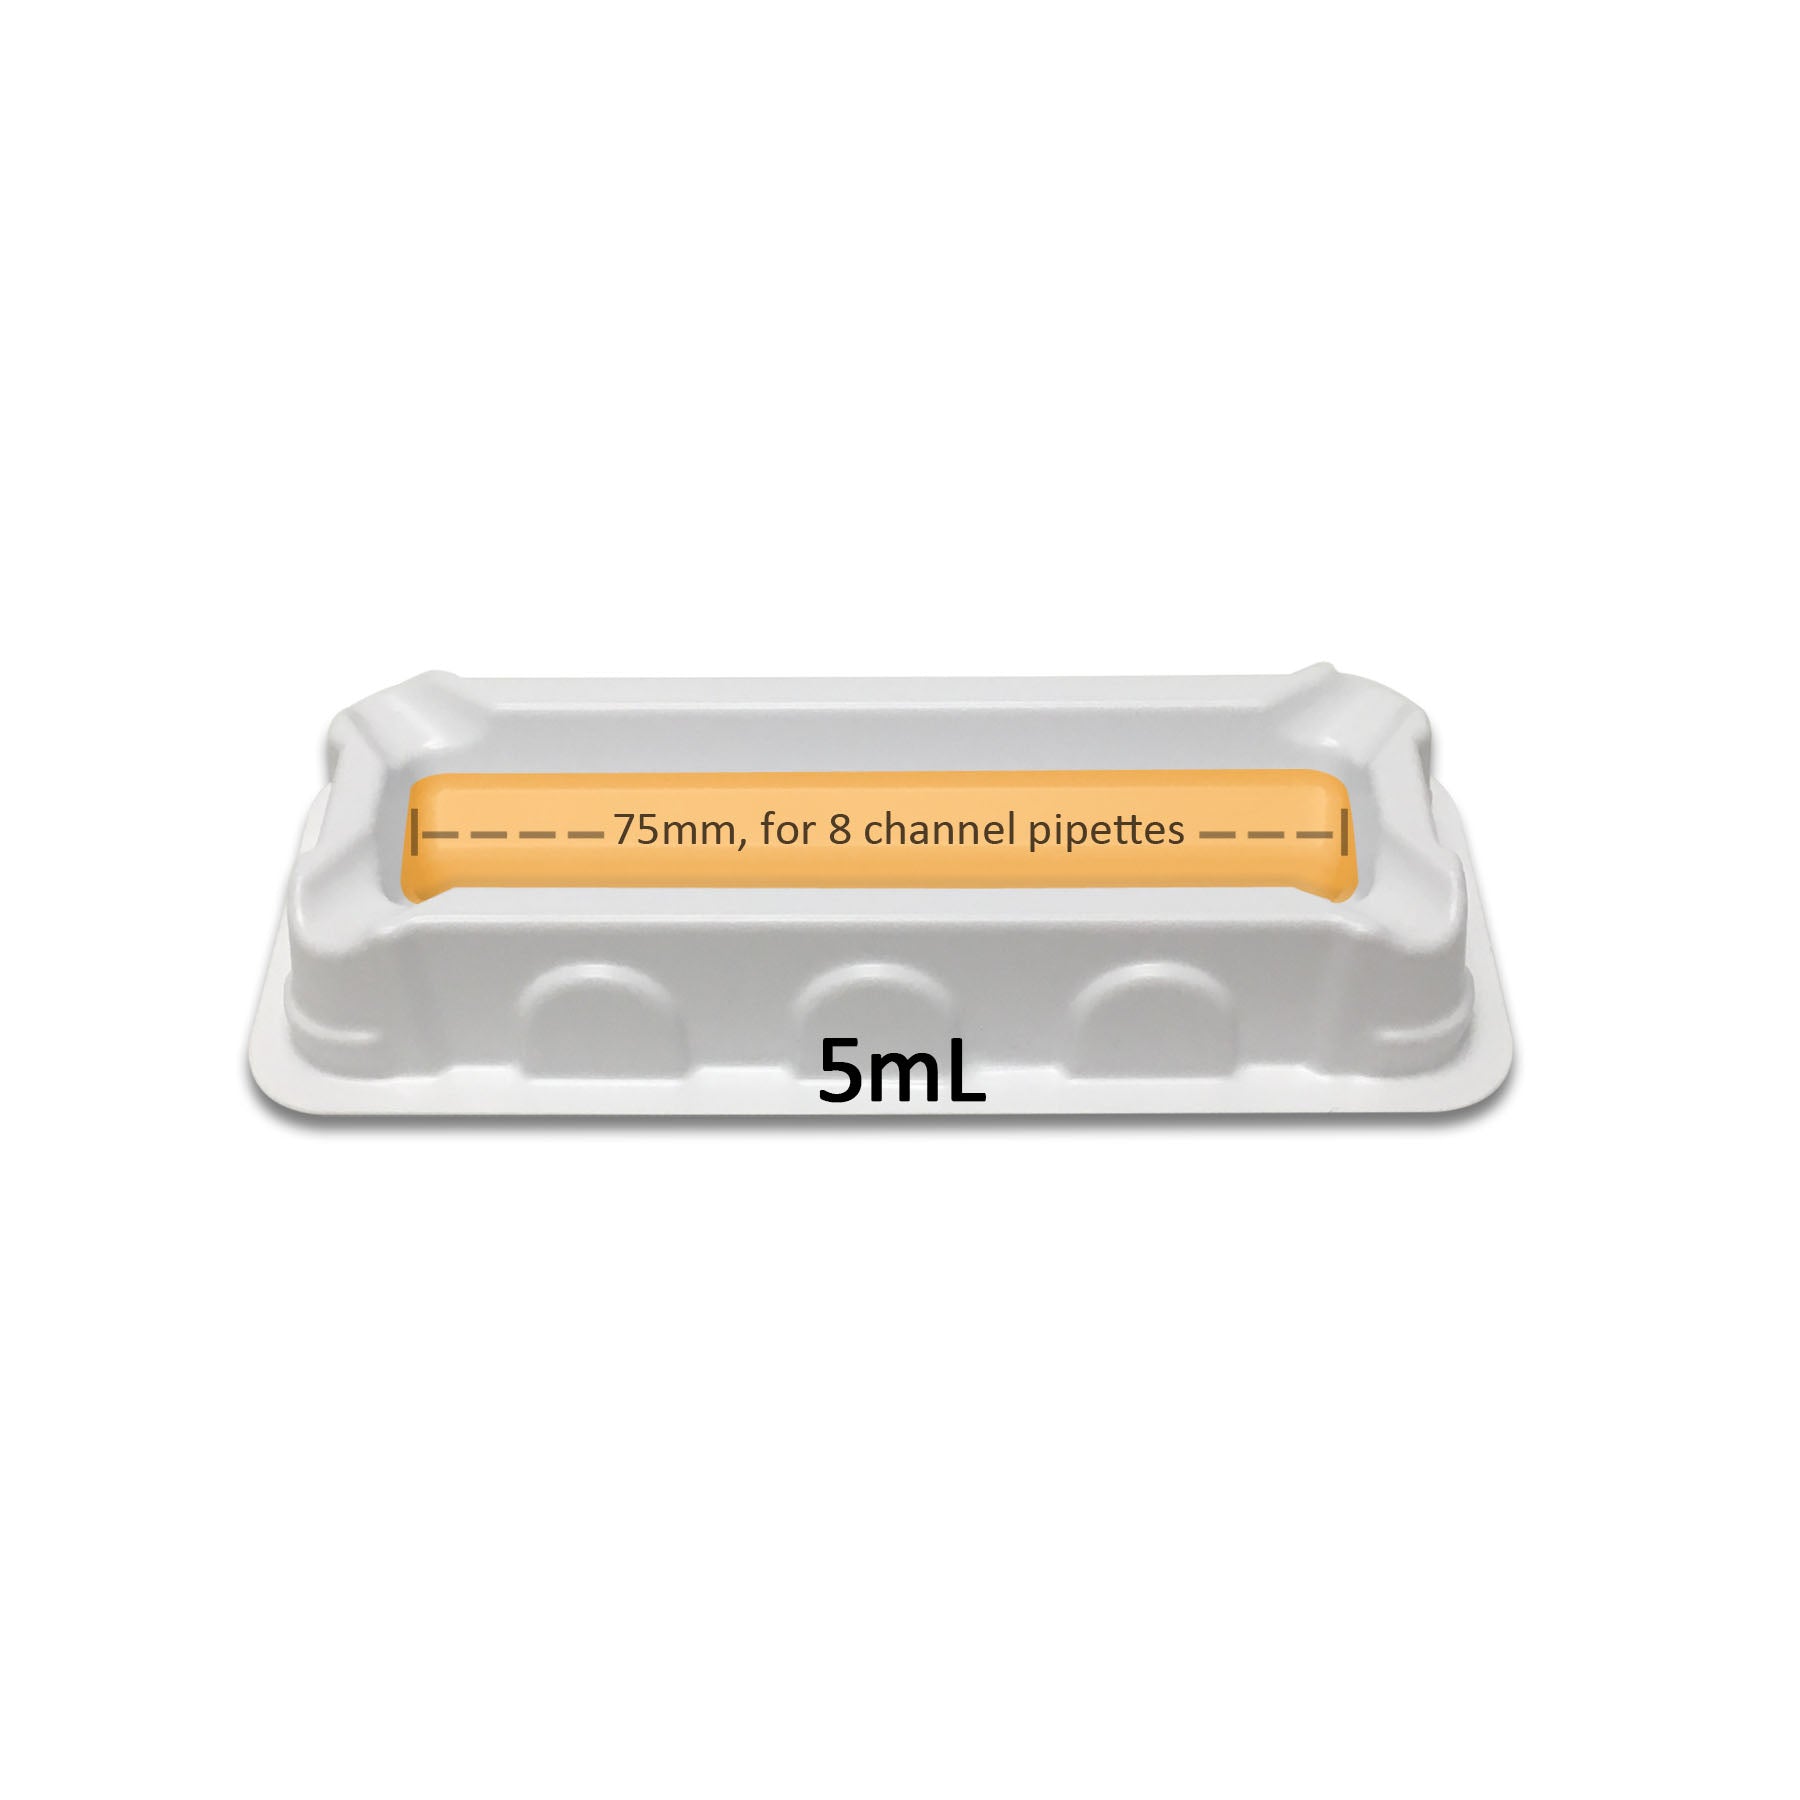 MTC Bio P7005-1S ASPIR-8? Solution Reservoirs, 5mL sterile, Individually wrapped